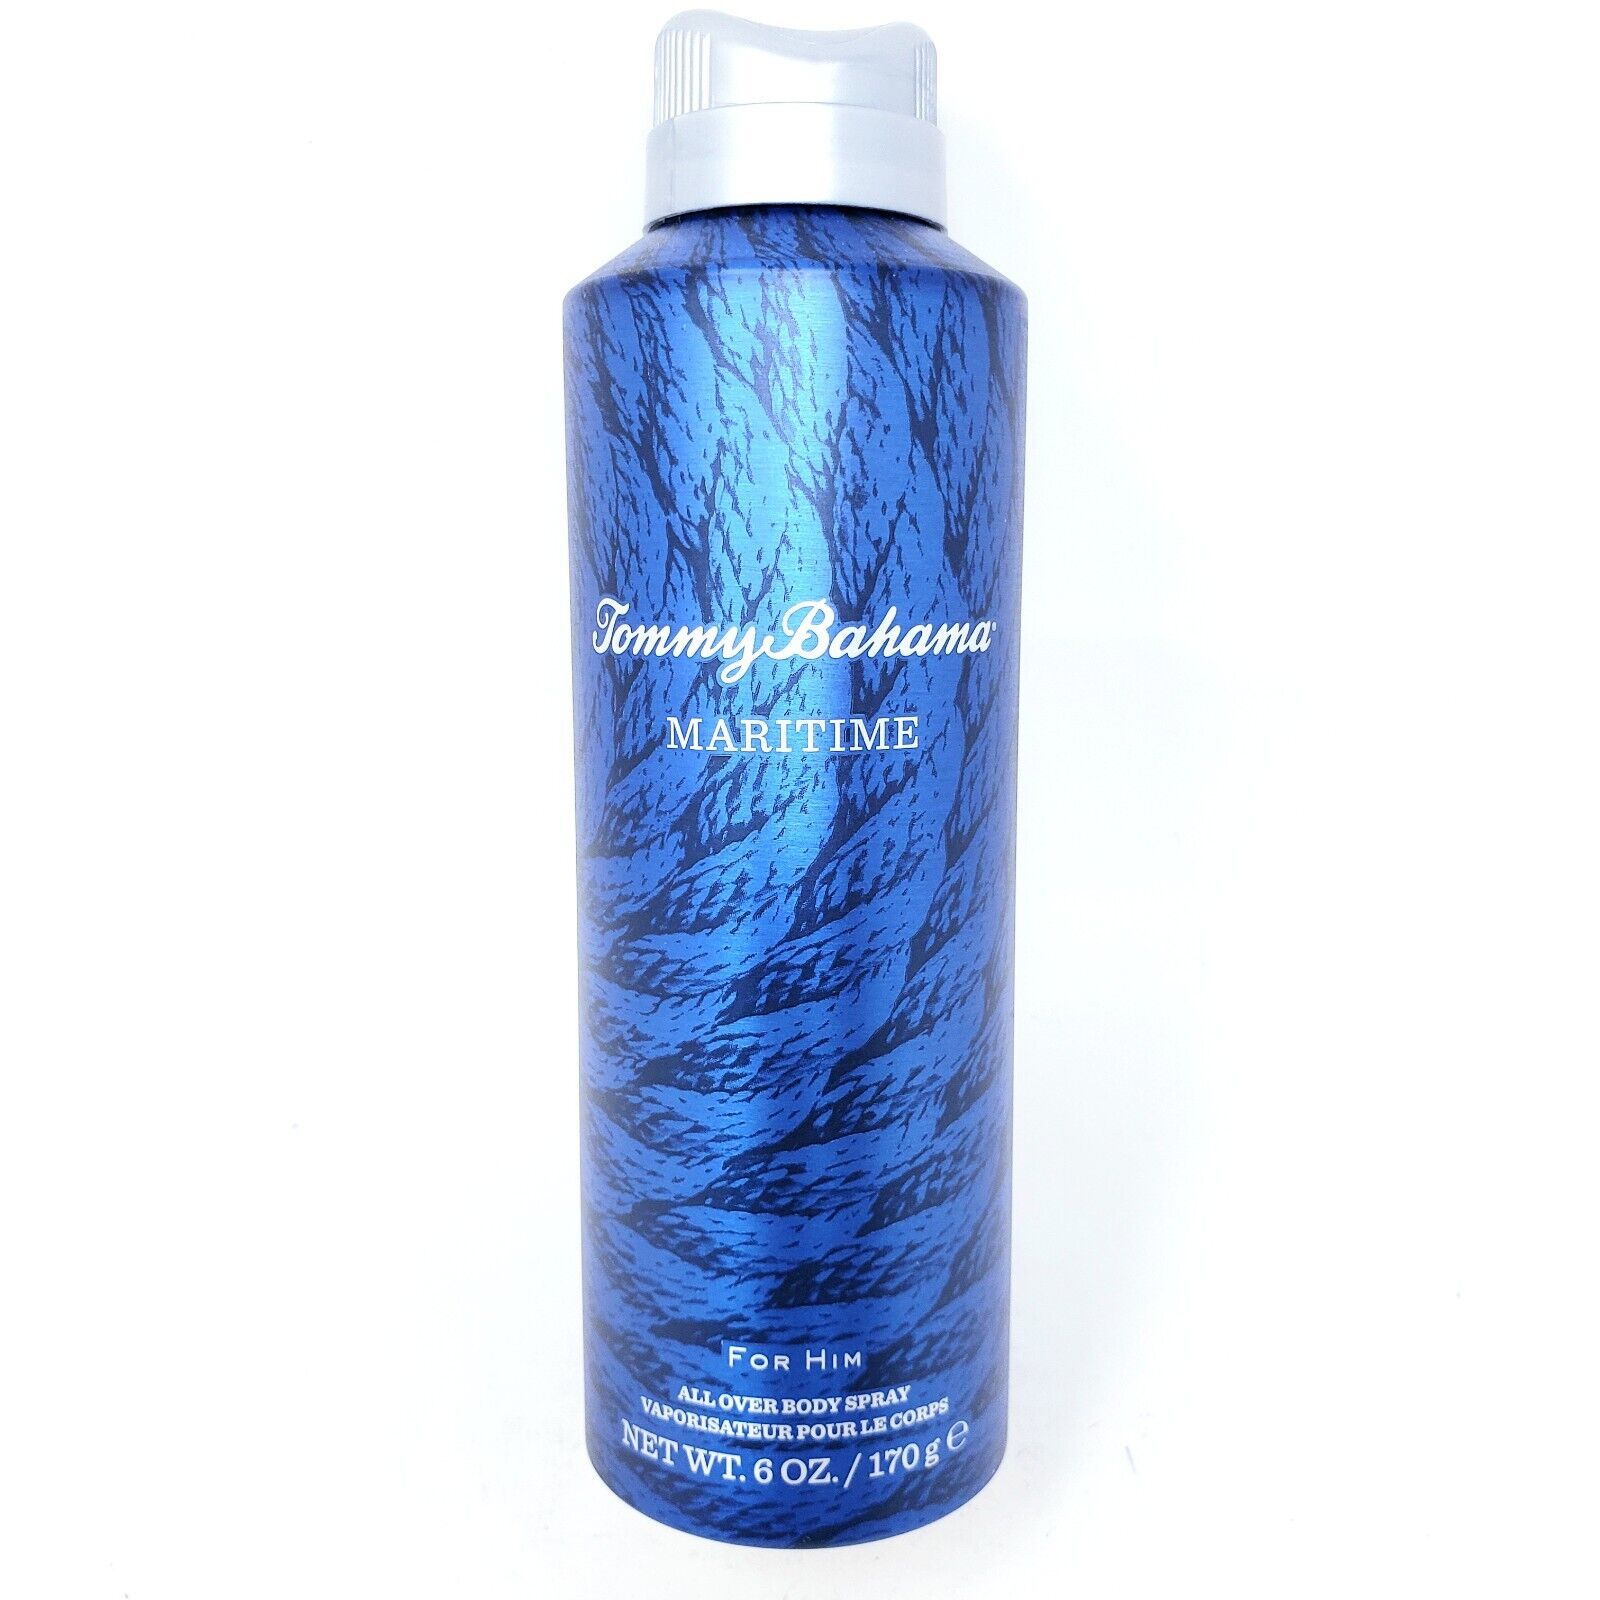 Tommy Bahama MARITIME for Him Men All Over Body Spray 6 oz 170g NEW IN CAN